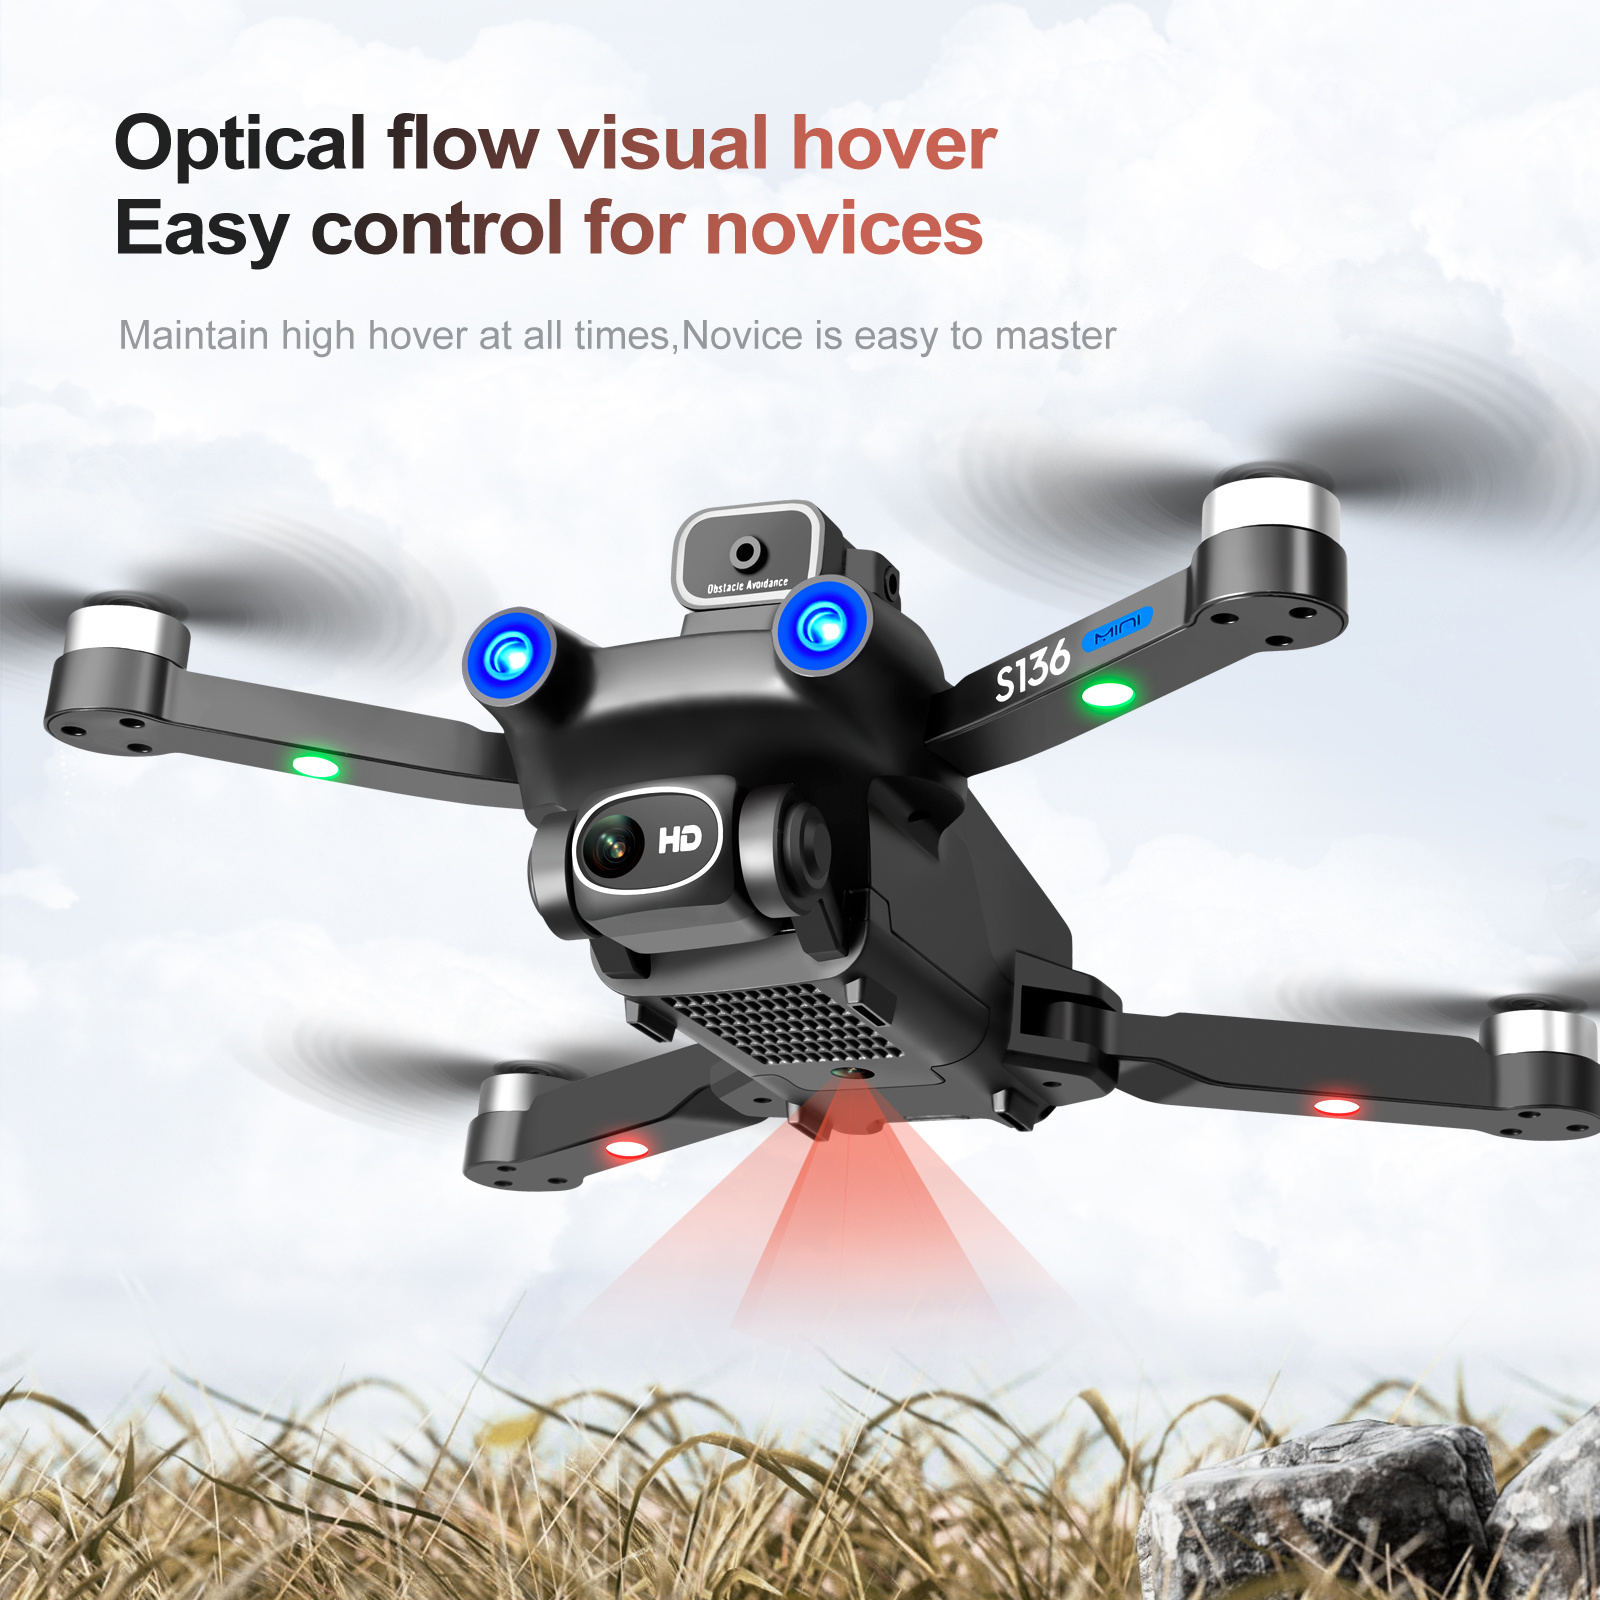 gps positioning drone with brushless motor headless mode intelligent obstacle avoidance optical flow positioning a key return ultra long range intelligent following strong wind resistance details 13